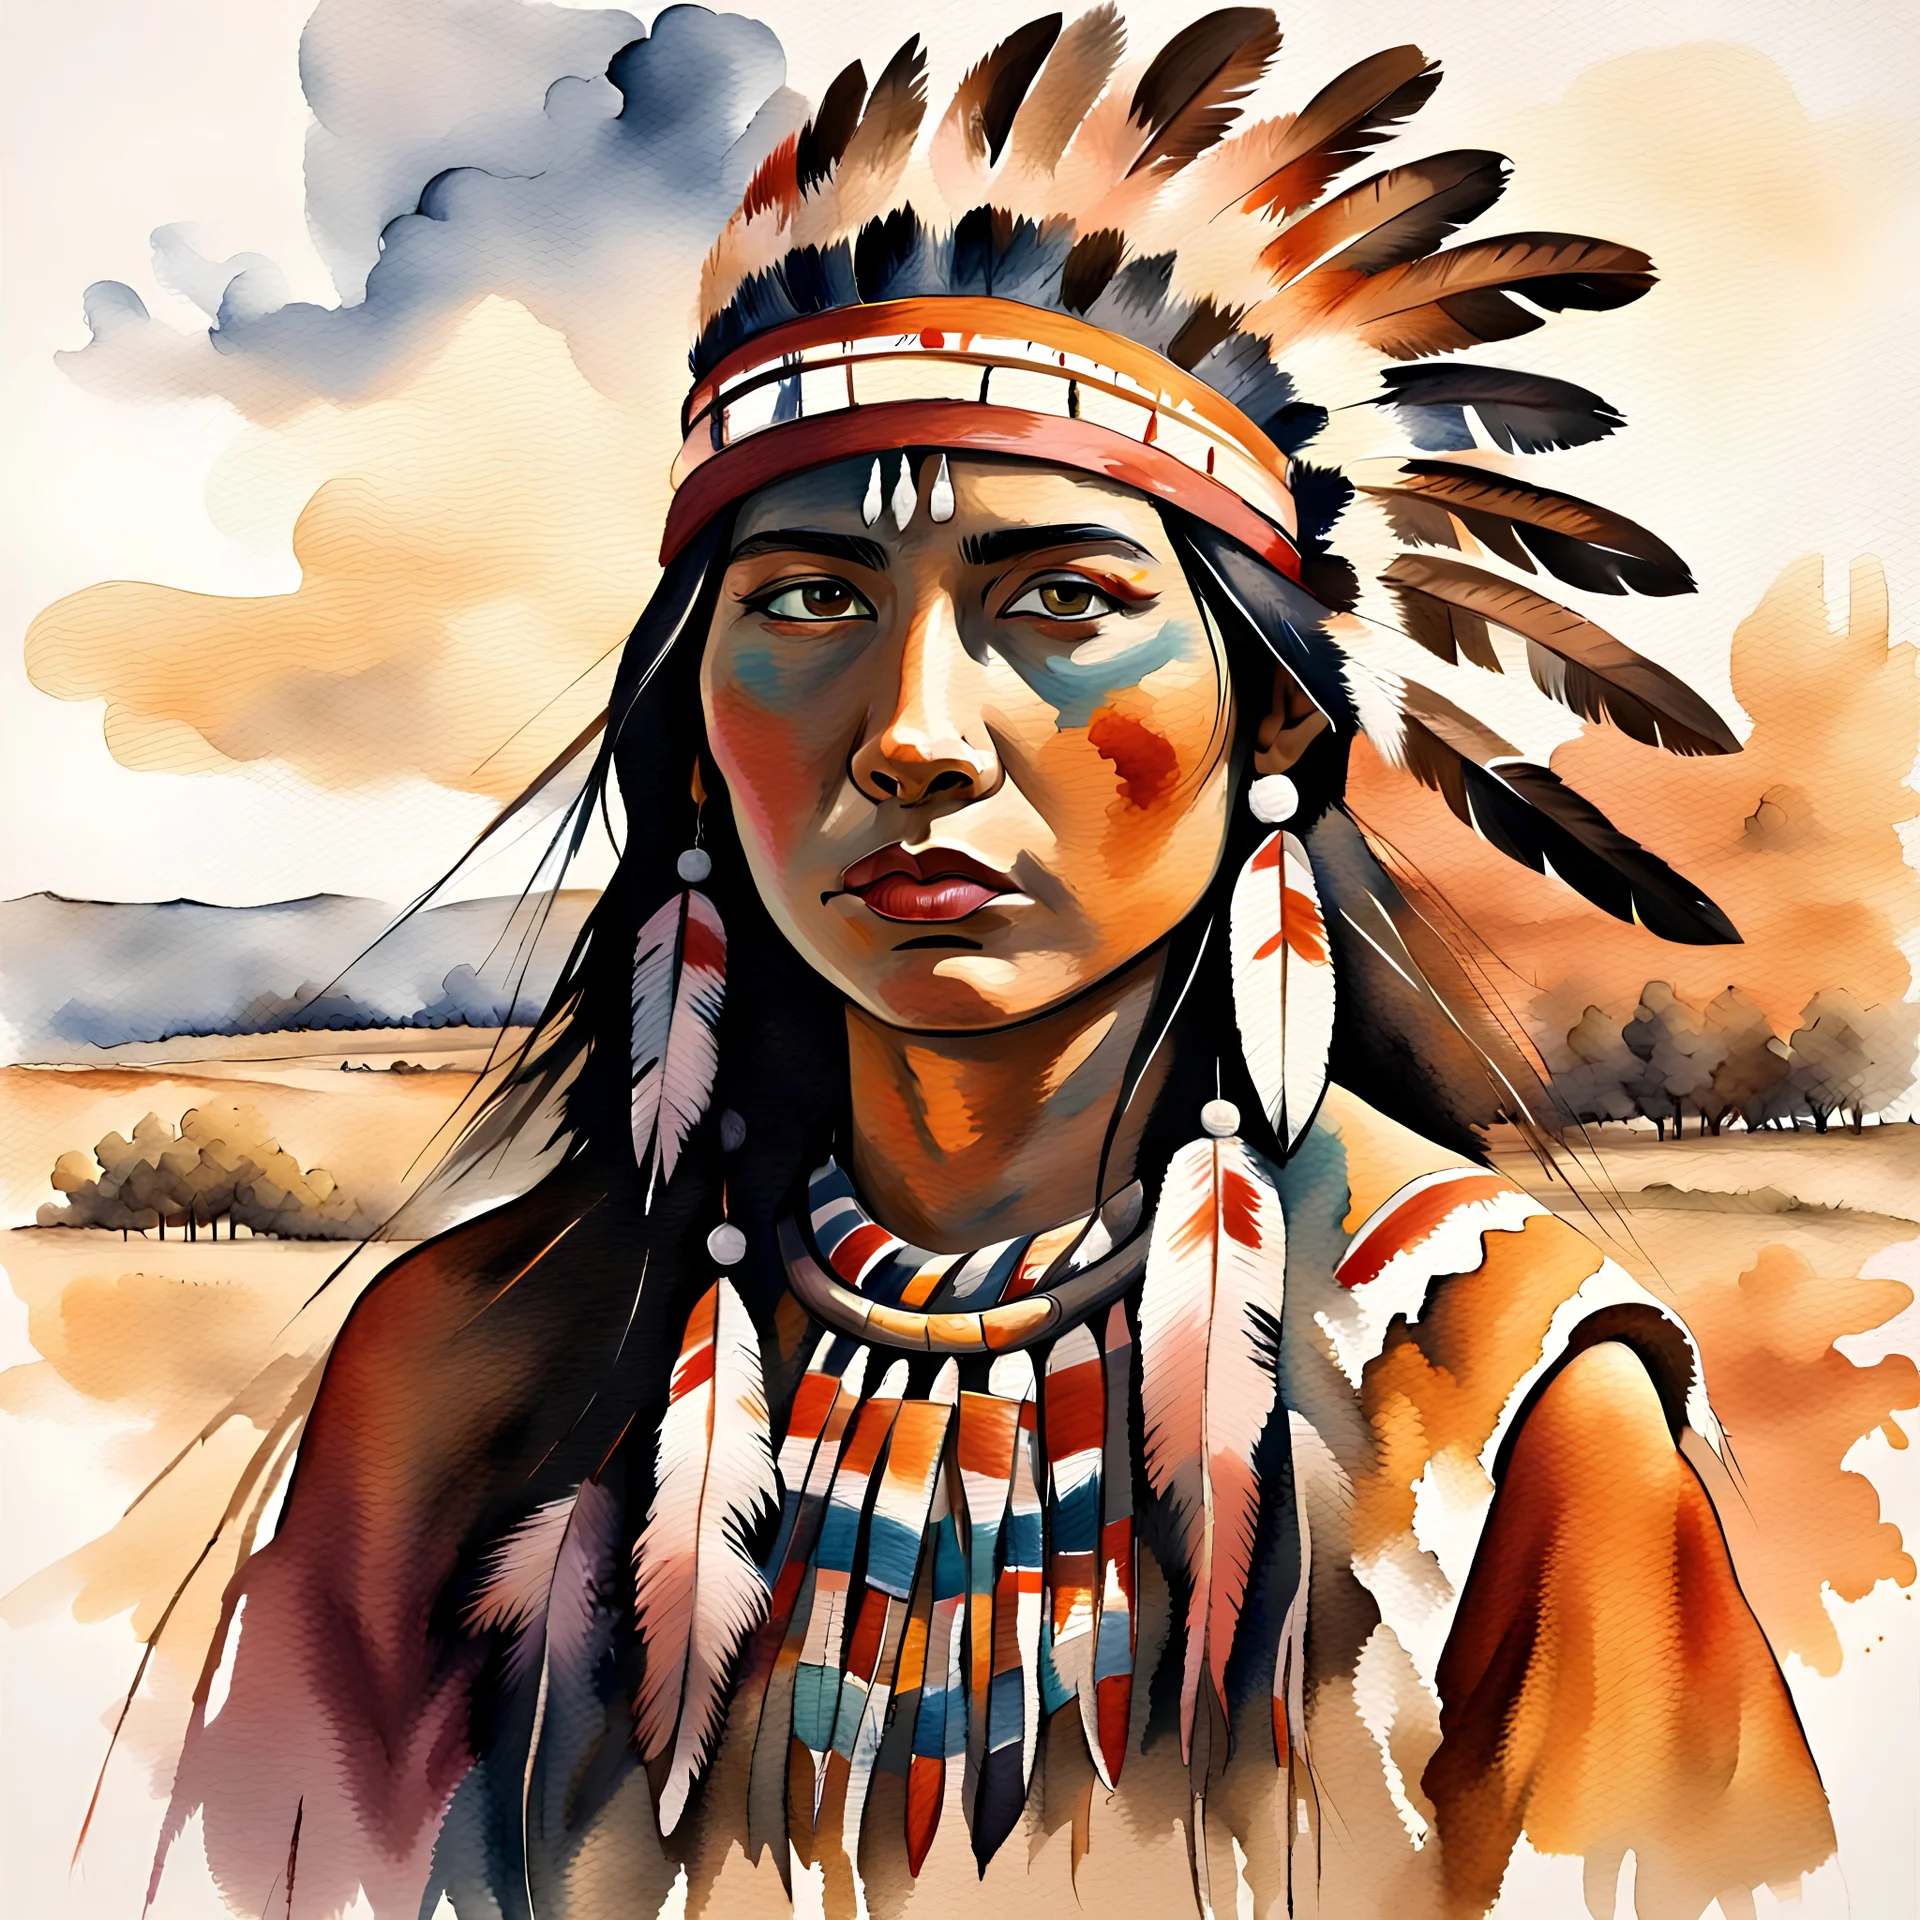 A portrait of a young American Indian woman in the prairies painted in watercolours and oils by expressionist in large brush strokes